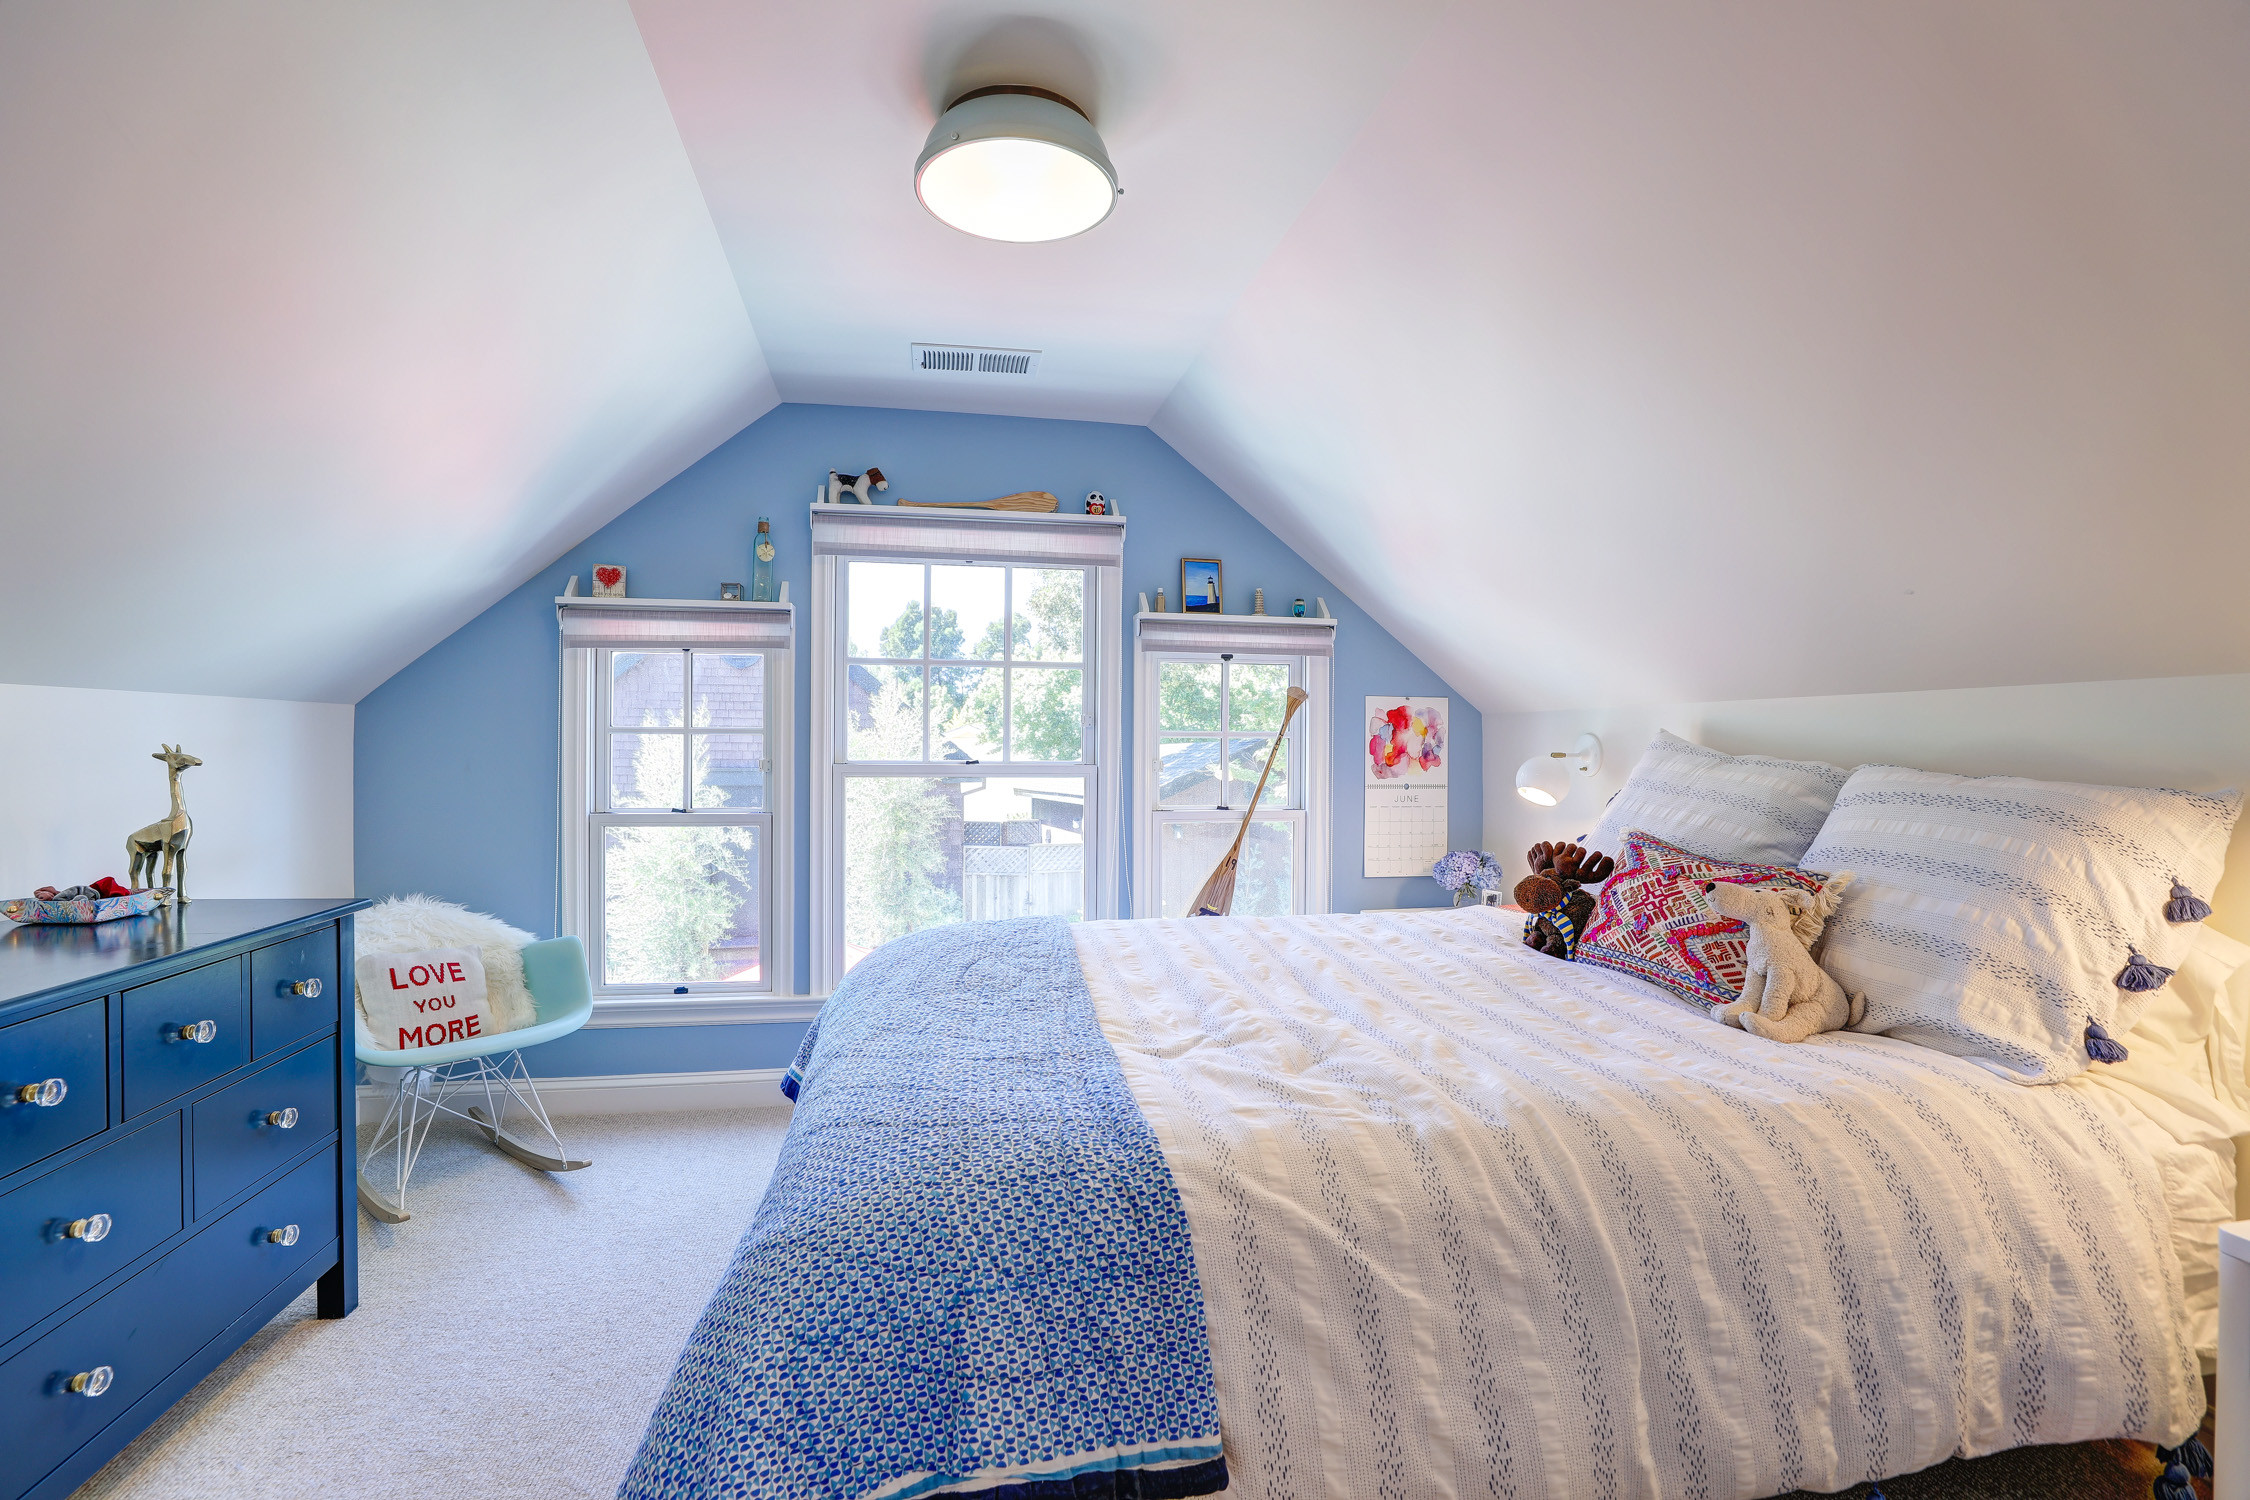 Baby and Kids Room Design Ideas That Inspire 17 - Baby and Kids' Room Design Ideas That Inspire